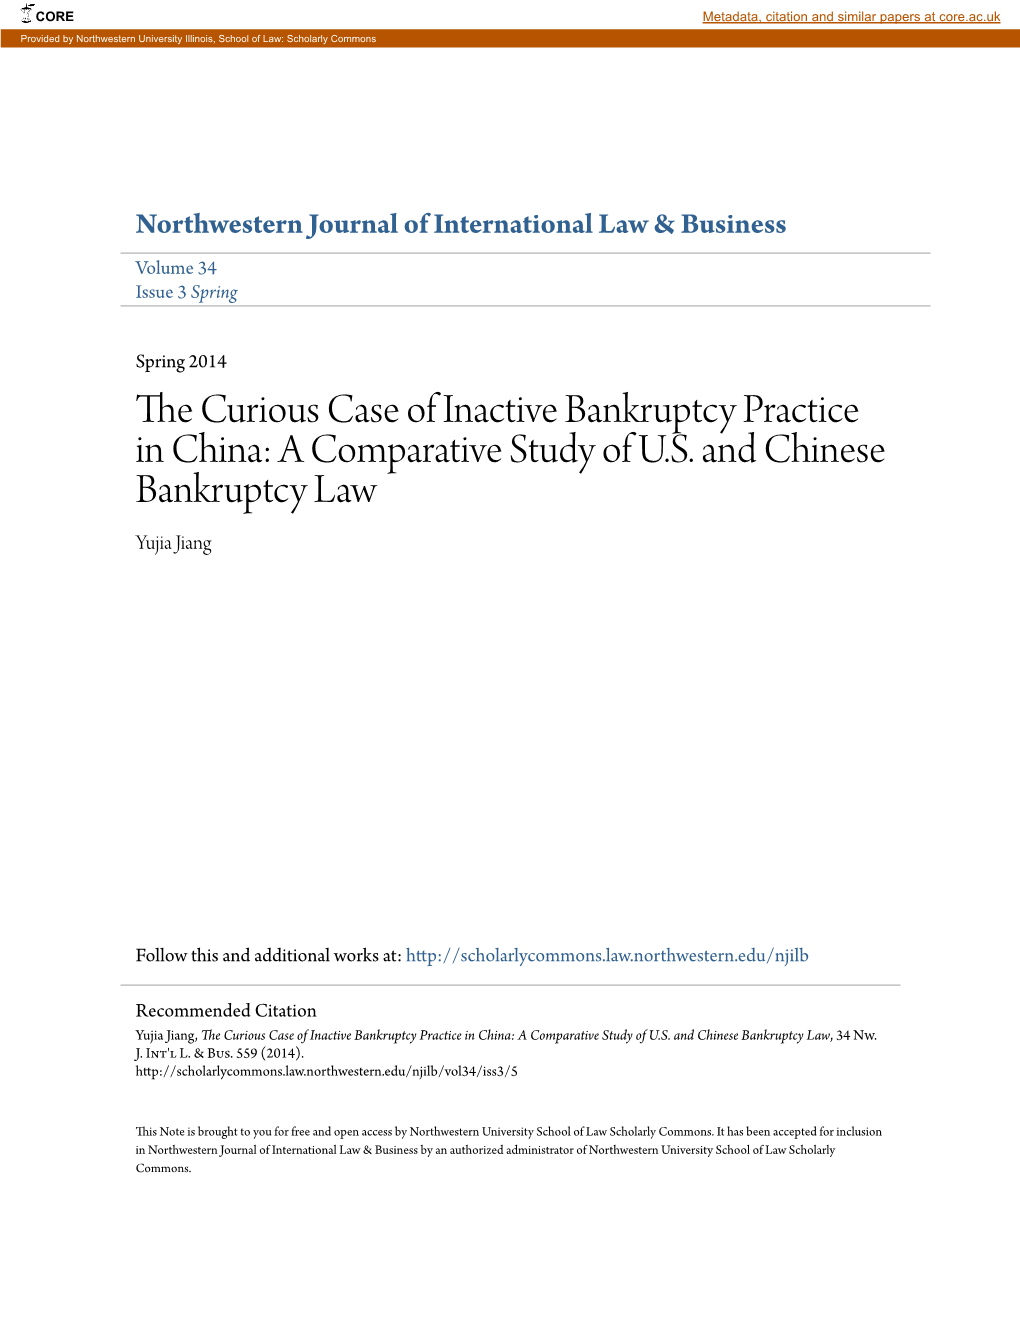 The Curious Case of Inactive Bankruptcy Practice in China: a Comparative Study of U.S